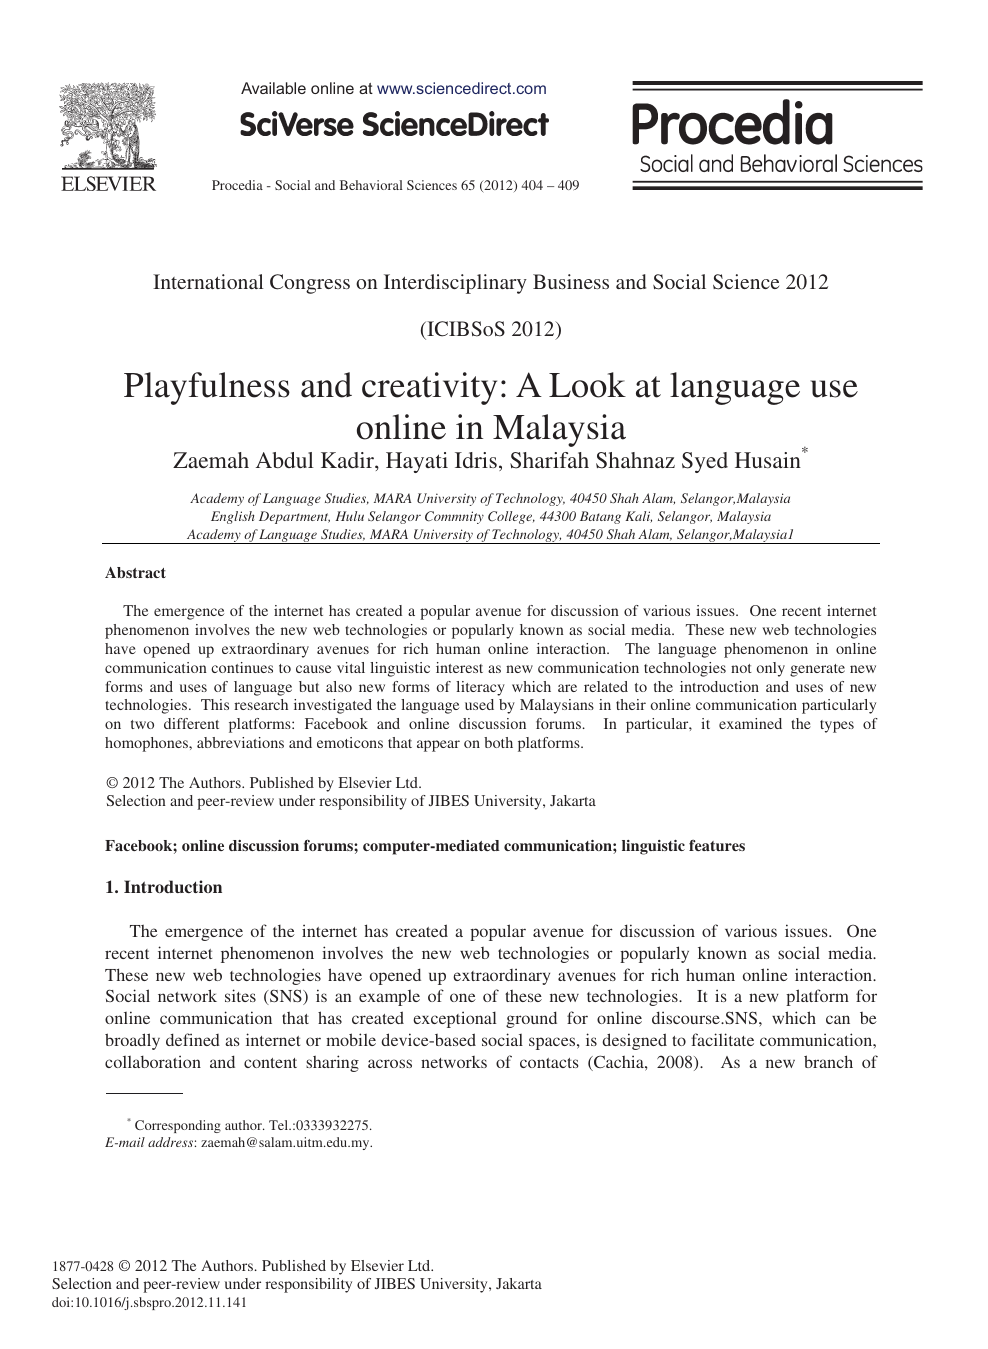 Playfulness And Creativity A Look At Language Use Online In Malaysia Topic Of Research Paper In Computer And Information Sciences Download Scholarly Article Pdf And Read For Free On Cyberleninka Open